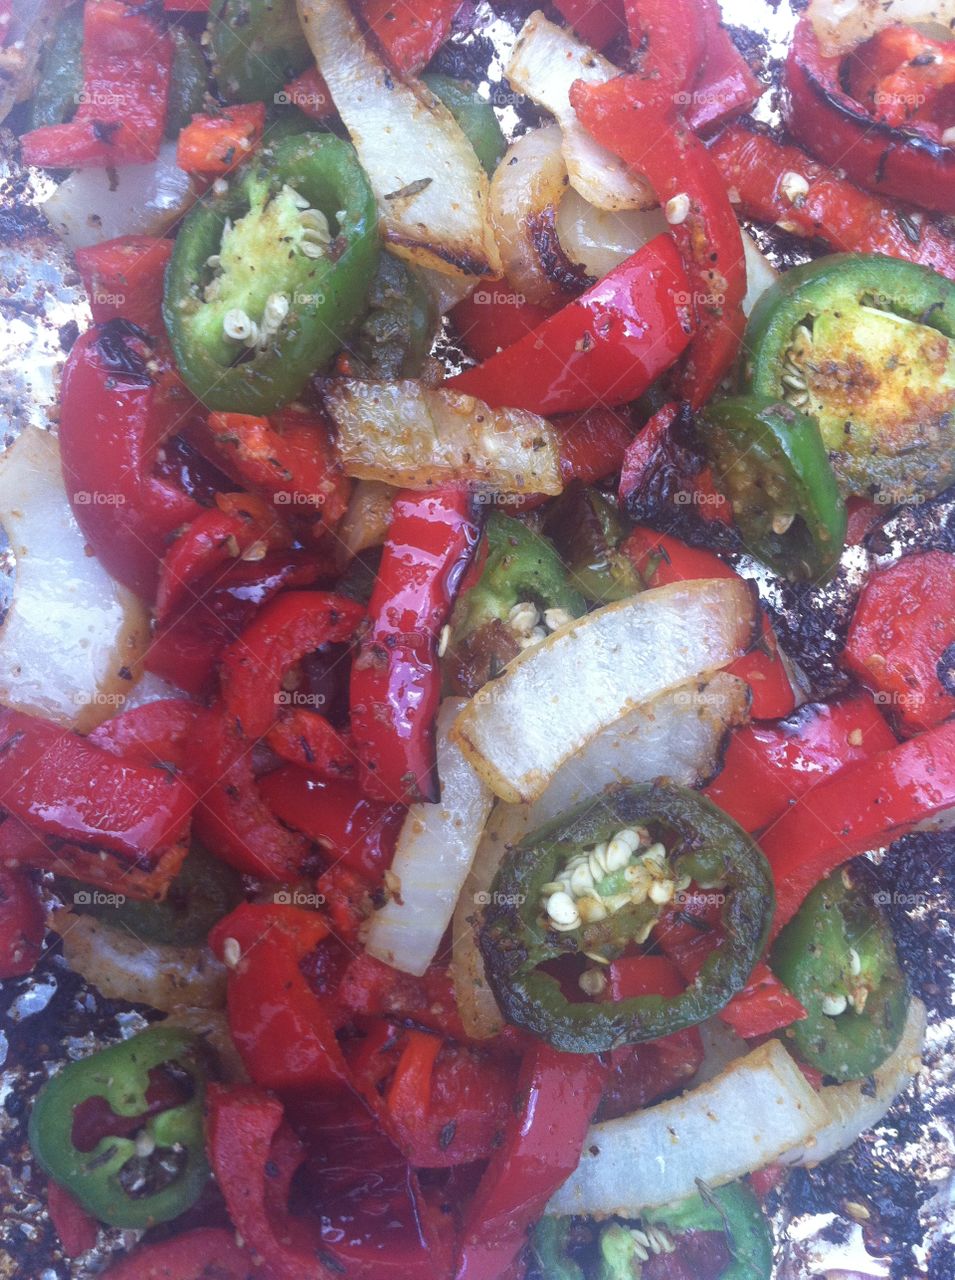 Grilled peppers and onions. Jalapeño peppers, red bell pepper, yellow onion